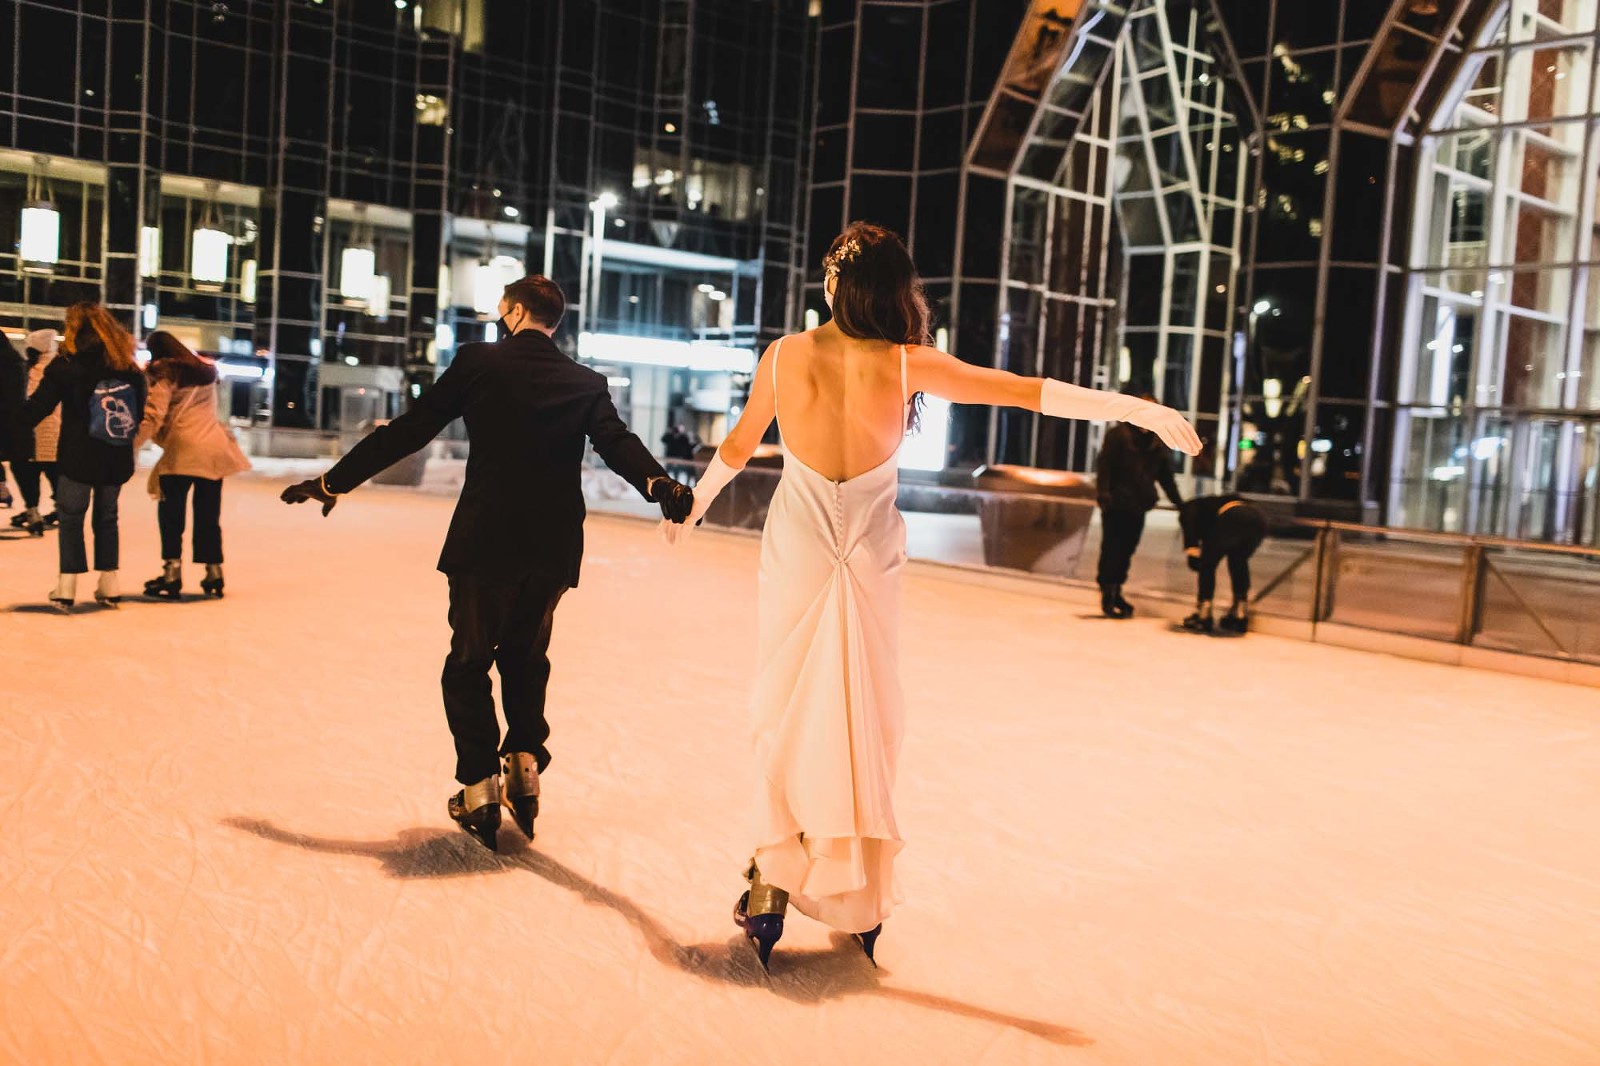 bride and groom ice skating in their wedding dress at night in the city